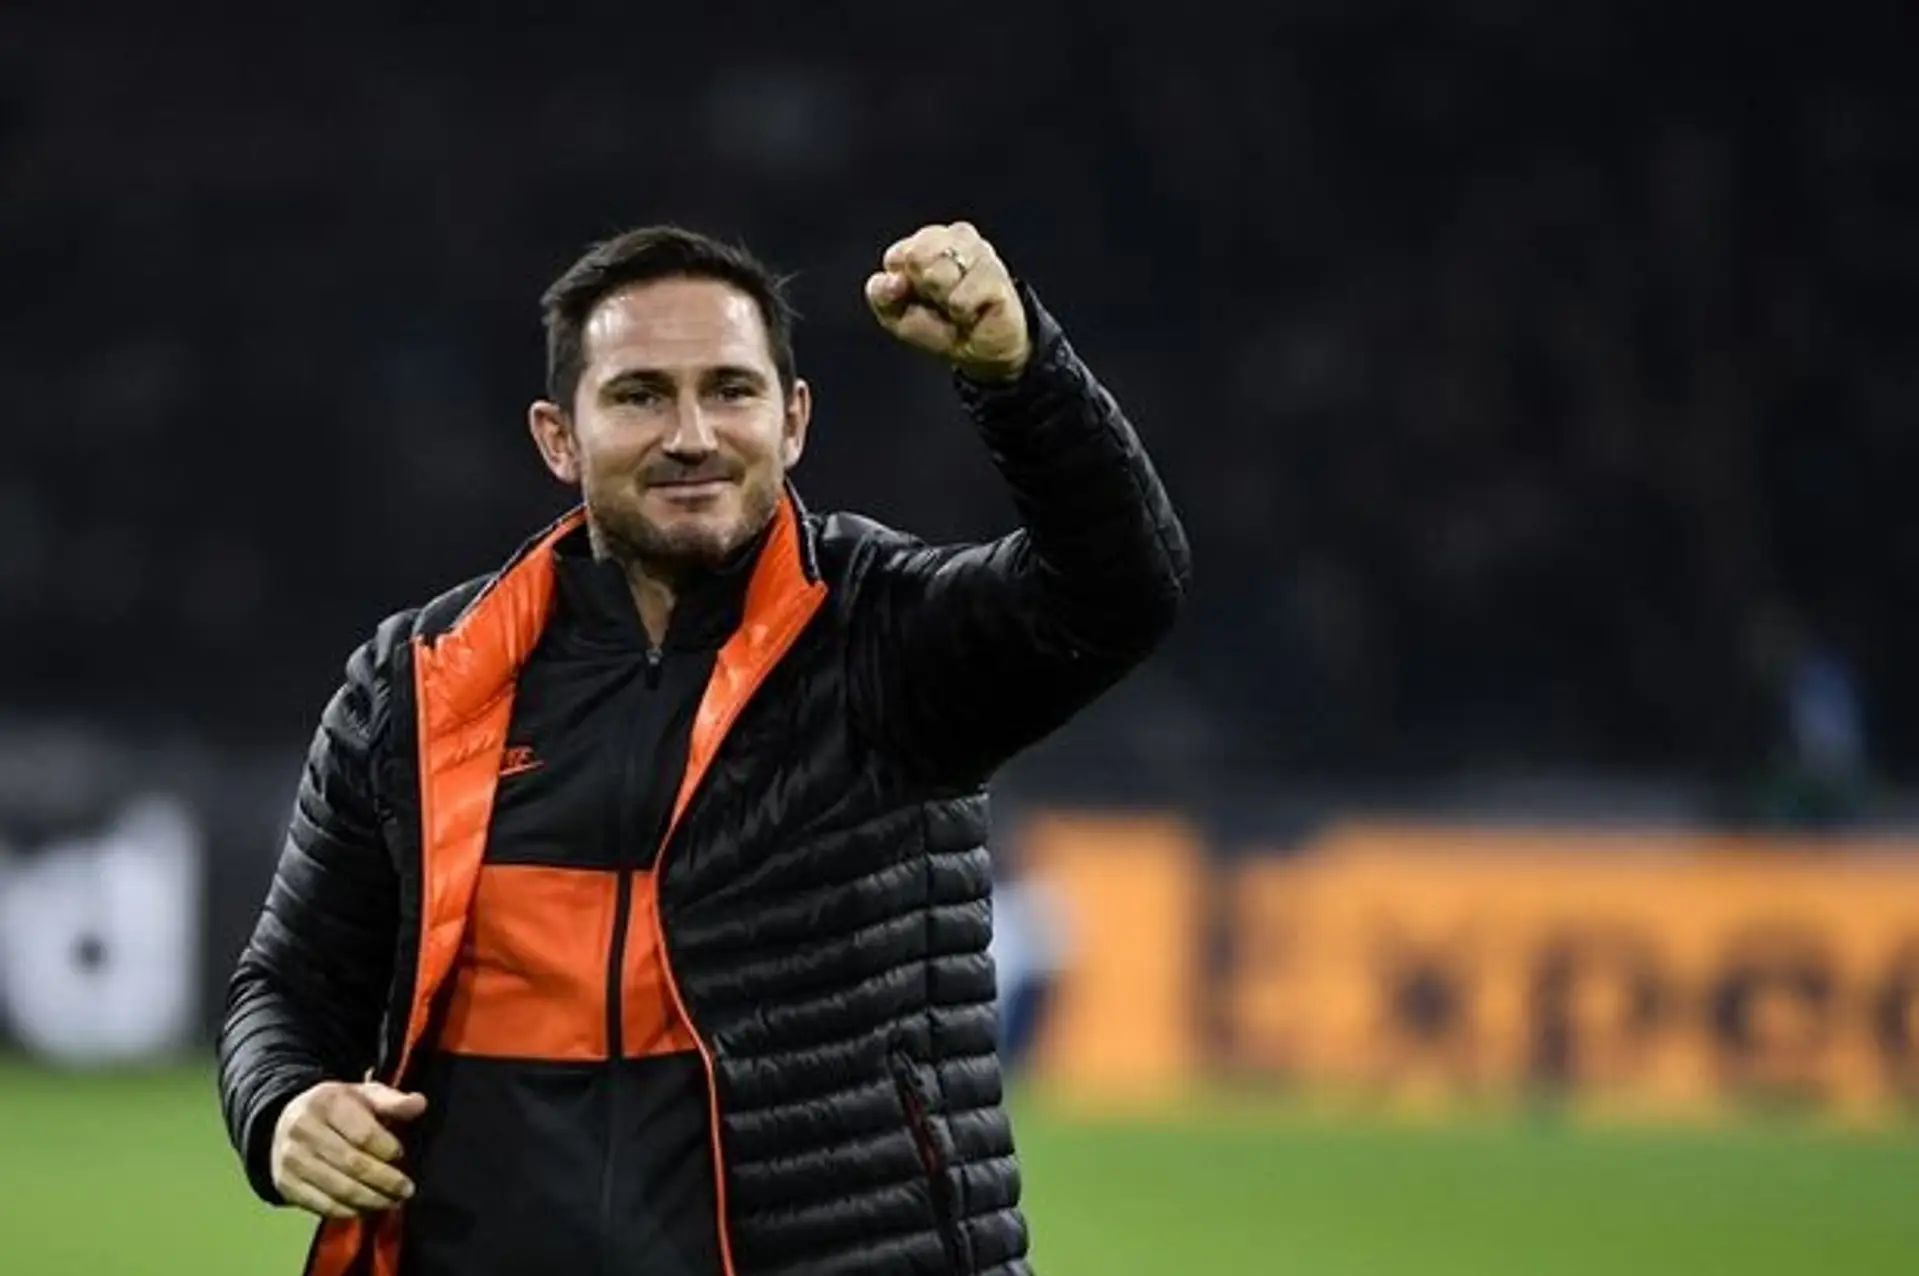 Frank Lampard is Building the Foundation to Make Chelsea Great Again